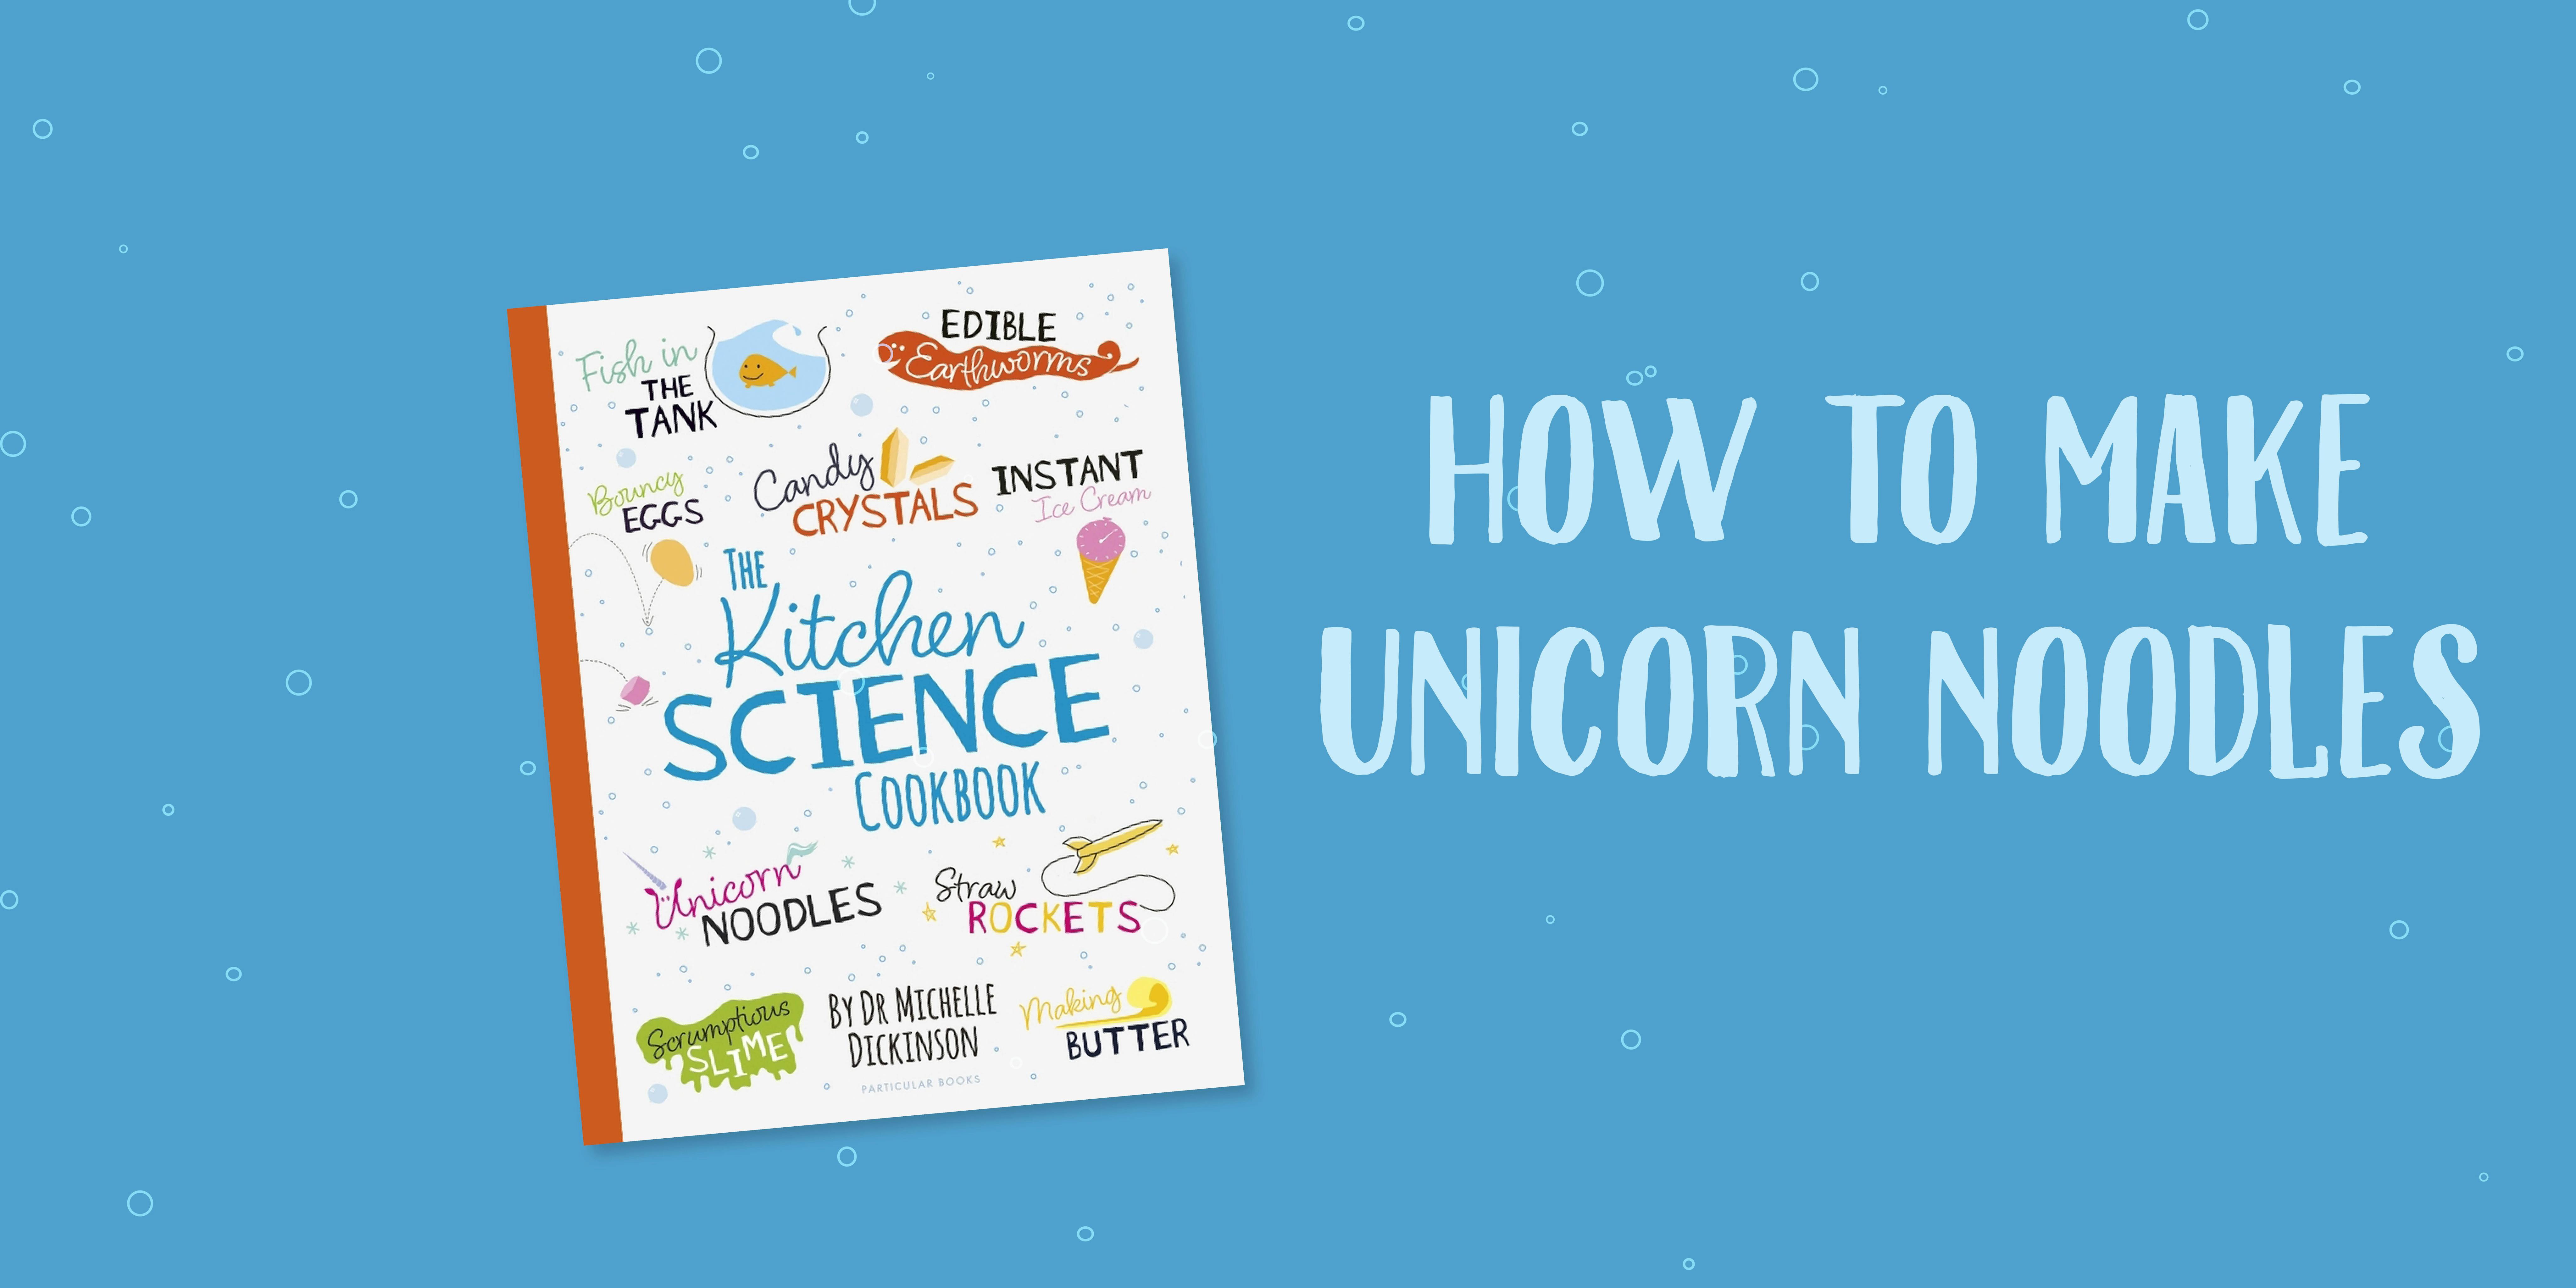 Unicorn noodles from The Kitchen Science Cookbook